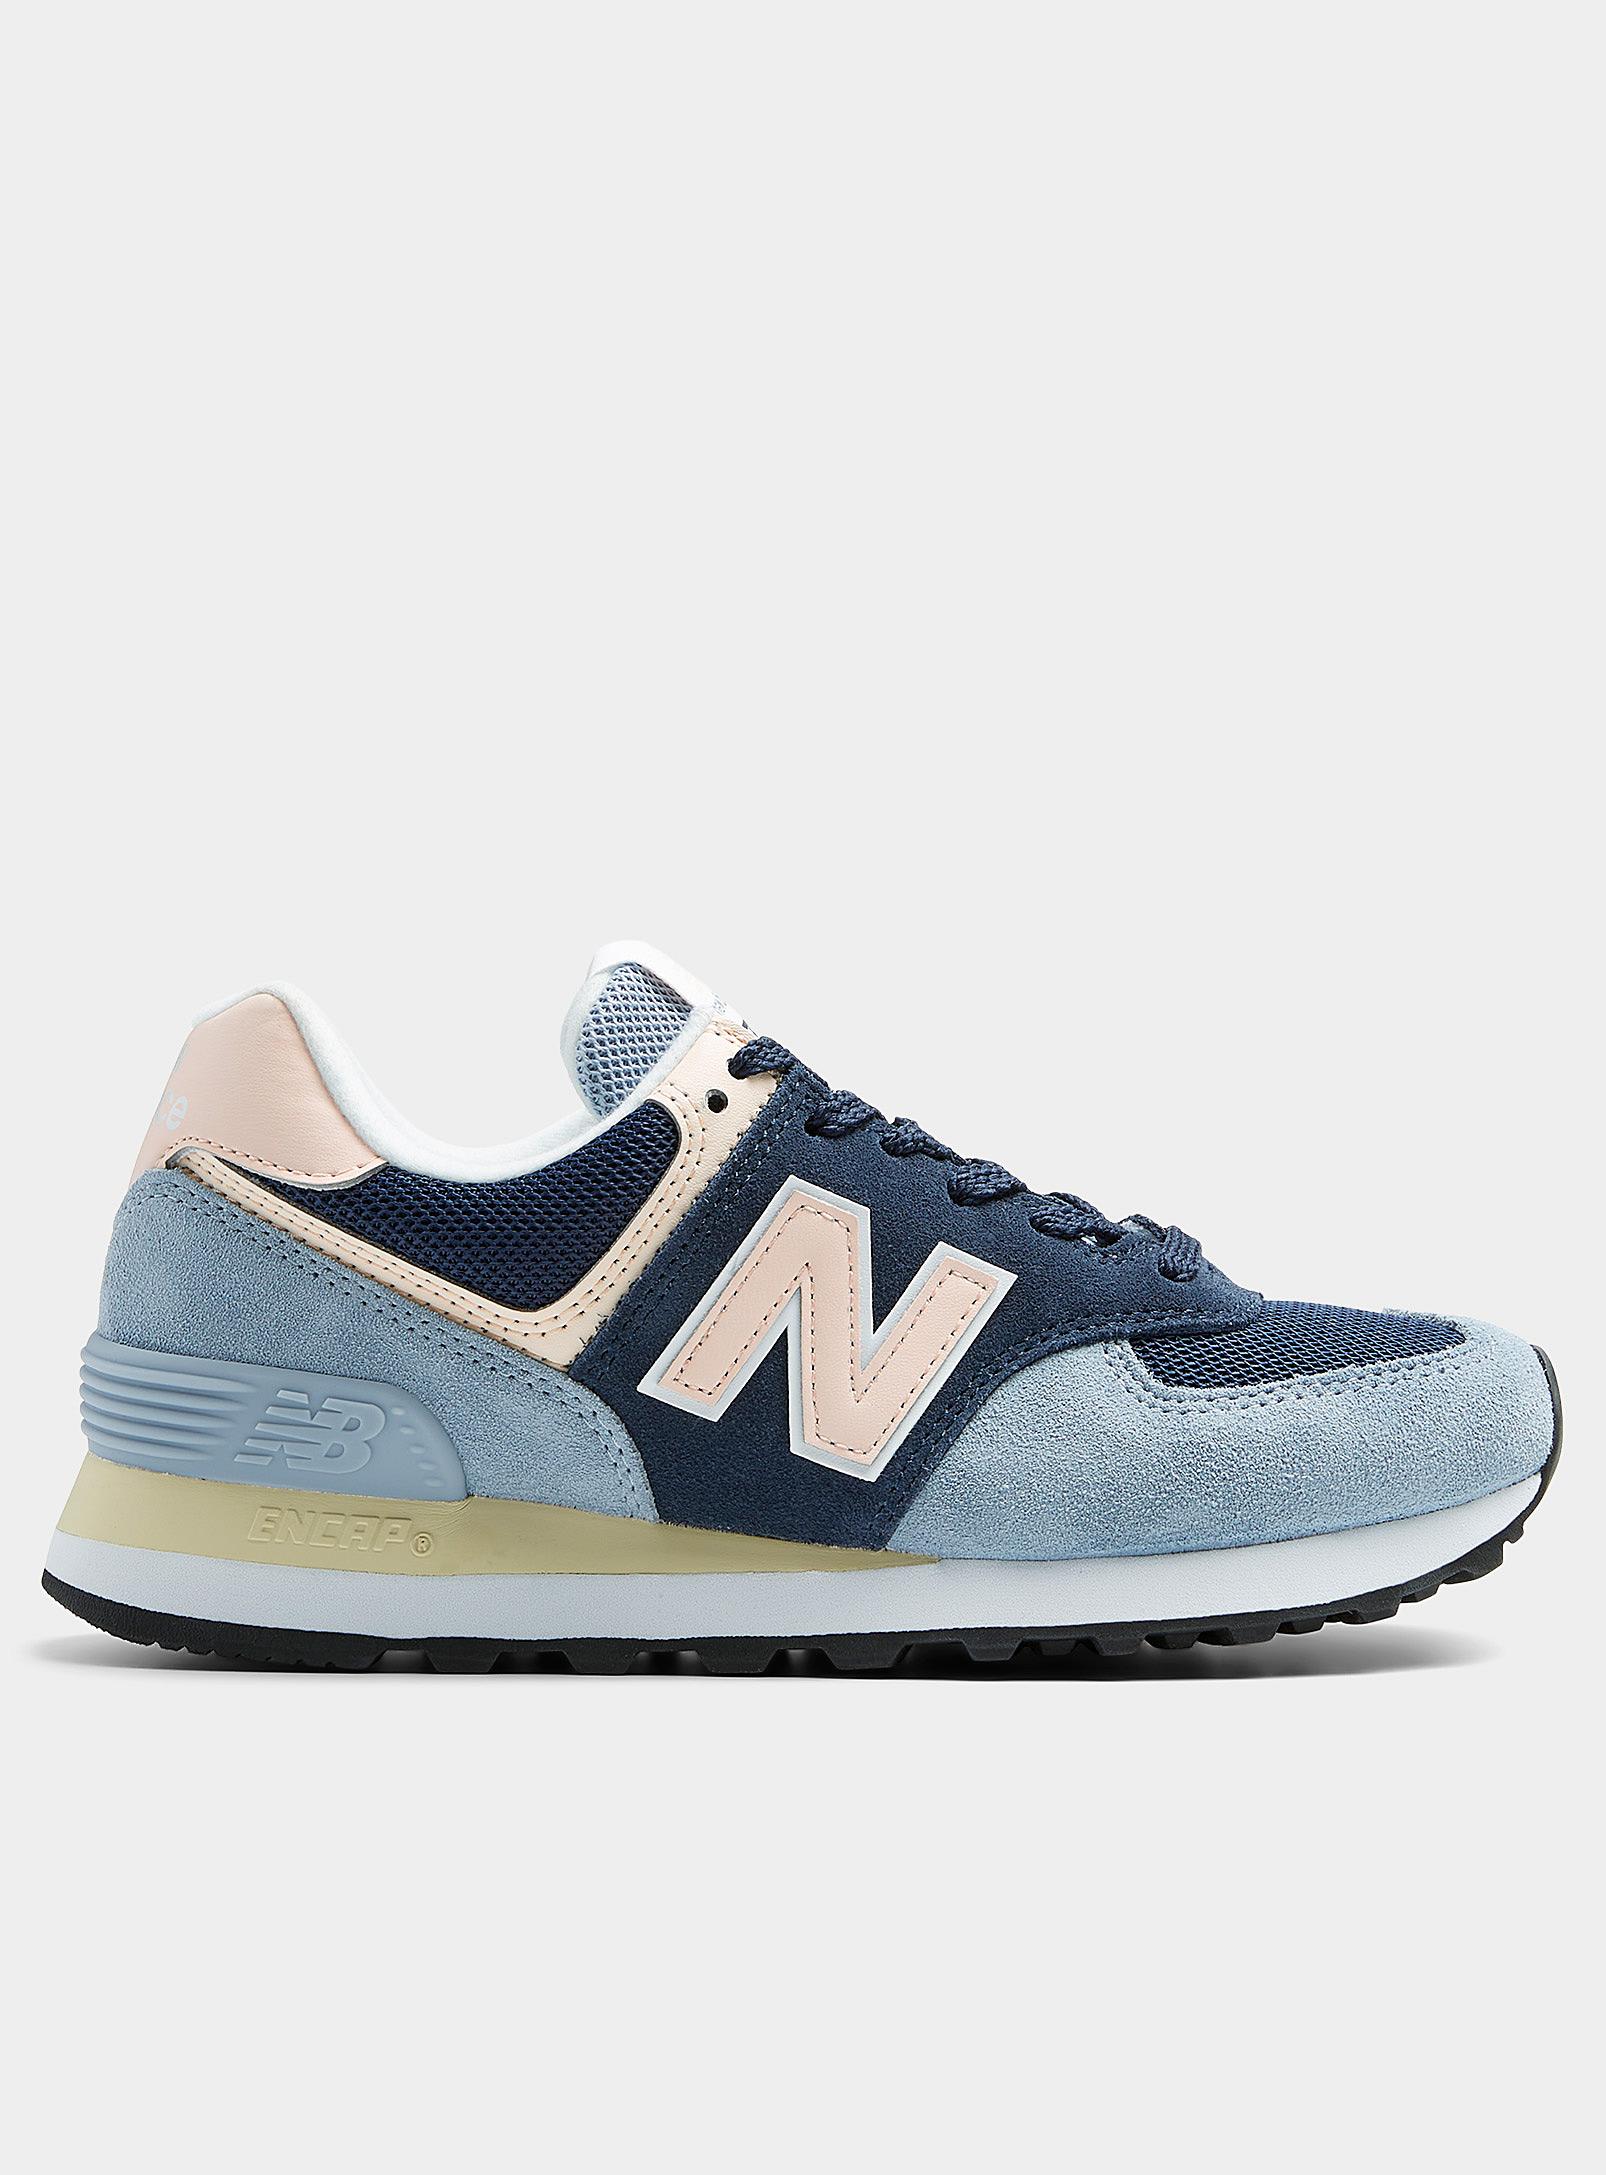 New Balance Blue And Peach 574 Sneakers Women | Lyst